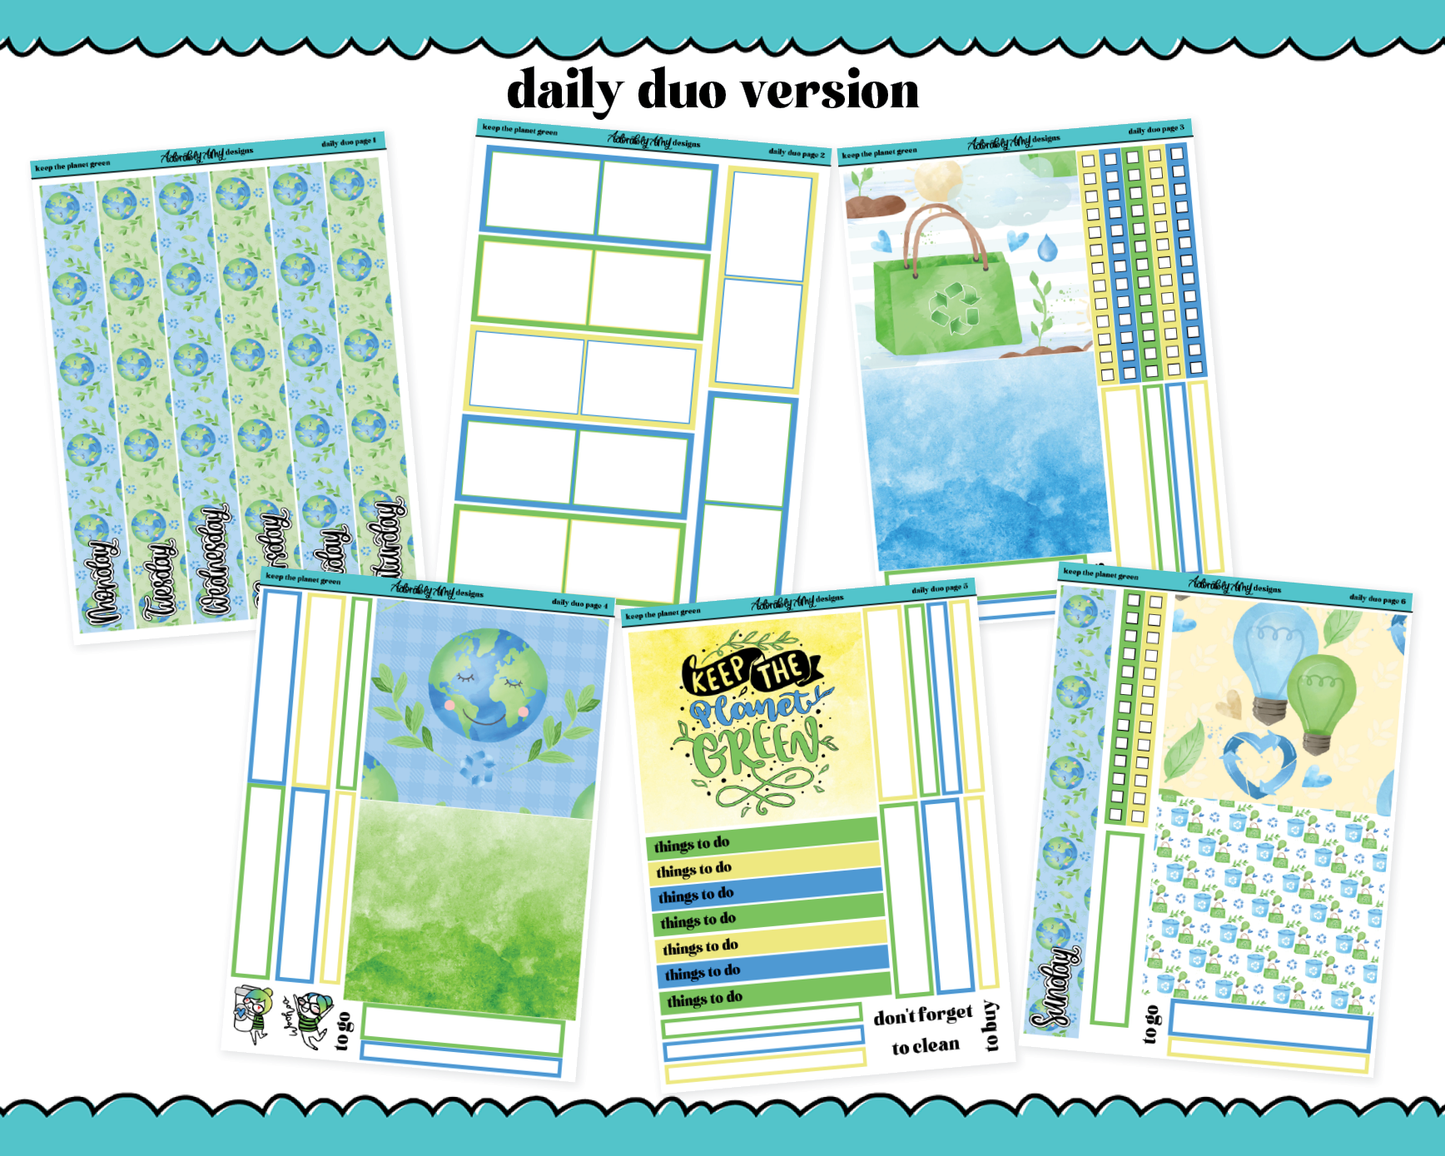 Daily Duo Keep the Planet Green Watercolor Weekly Planner Sticker Kit for Daily Duo Planner